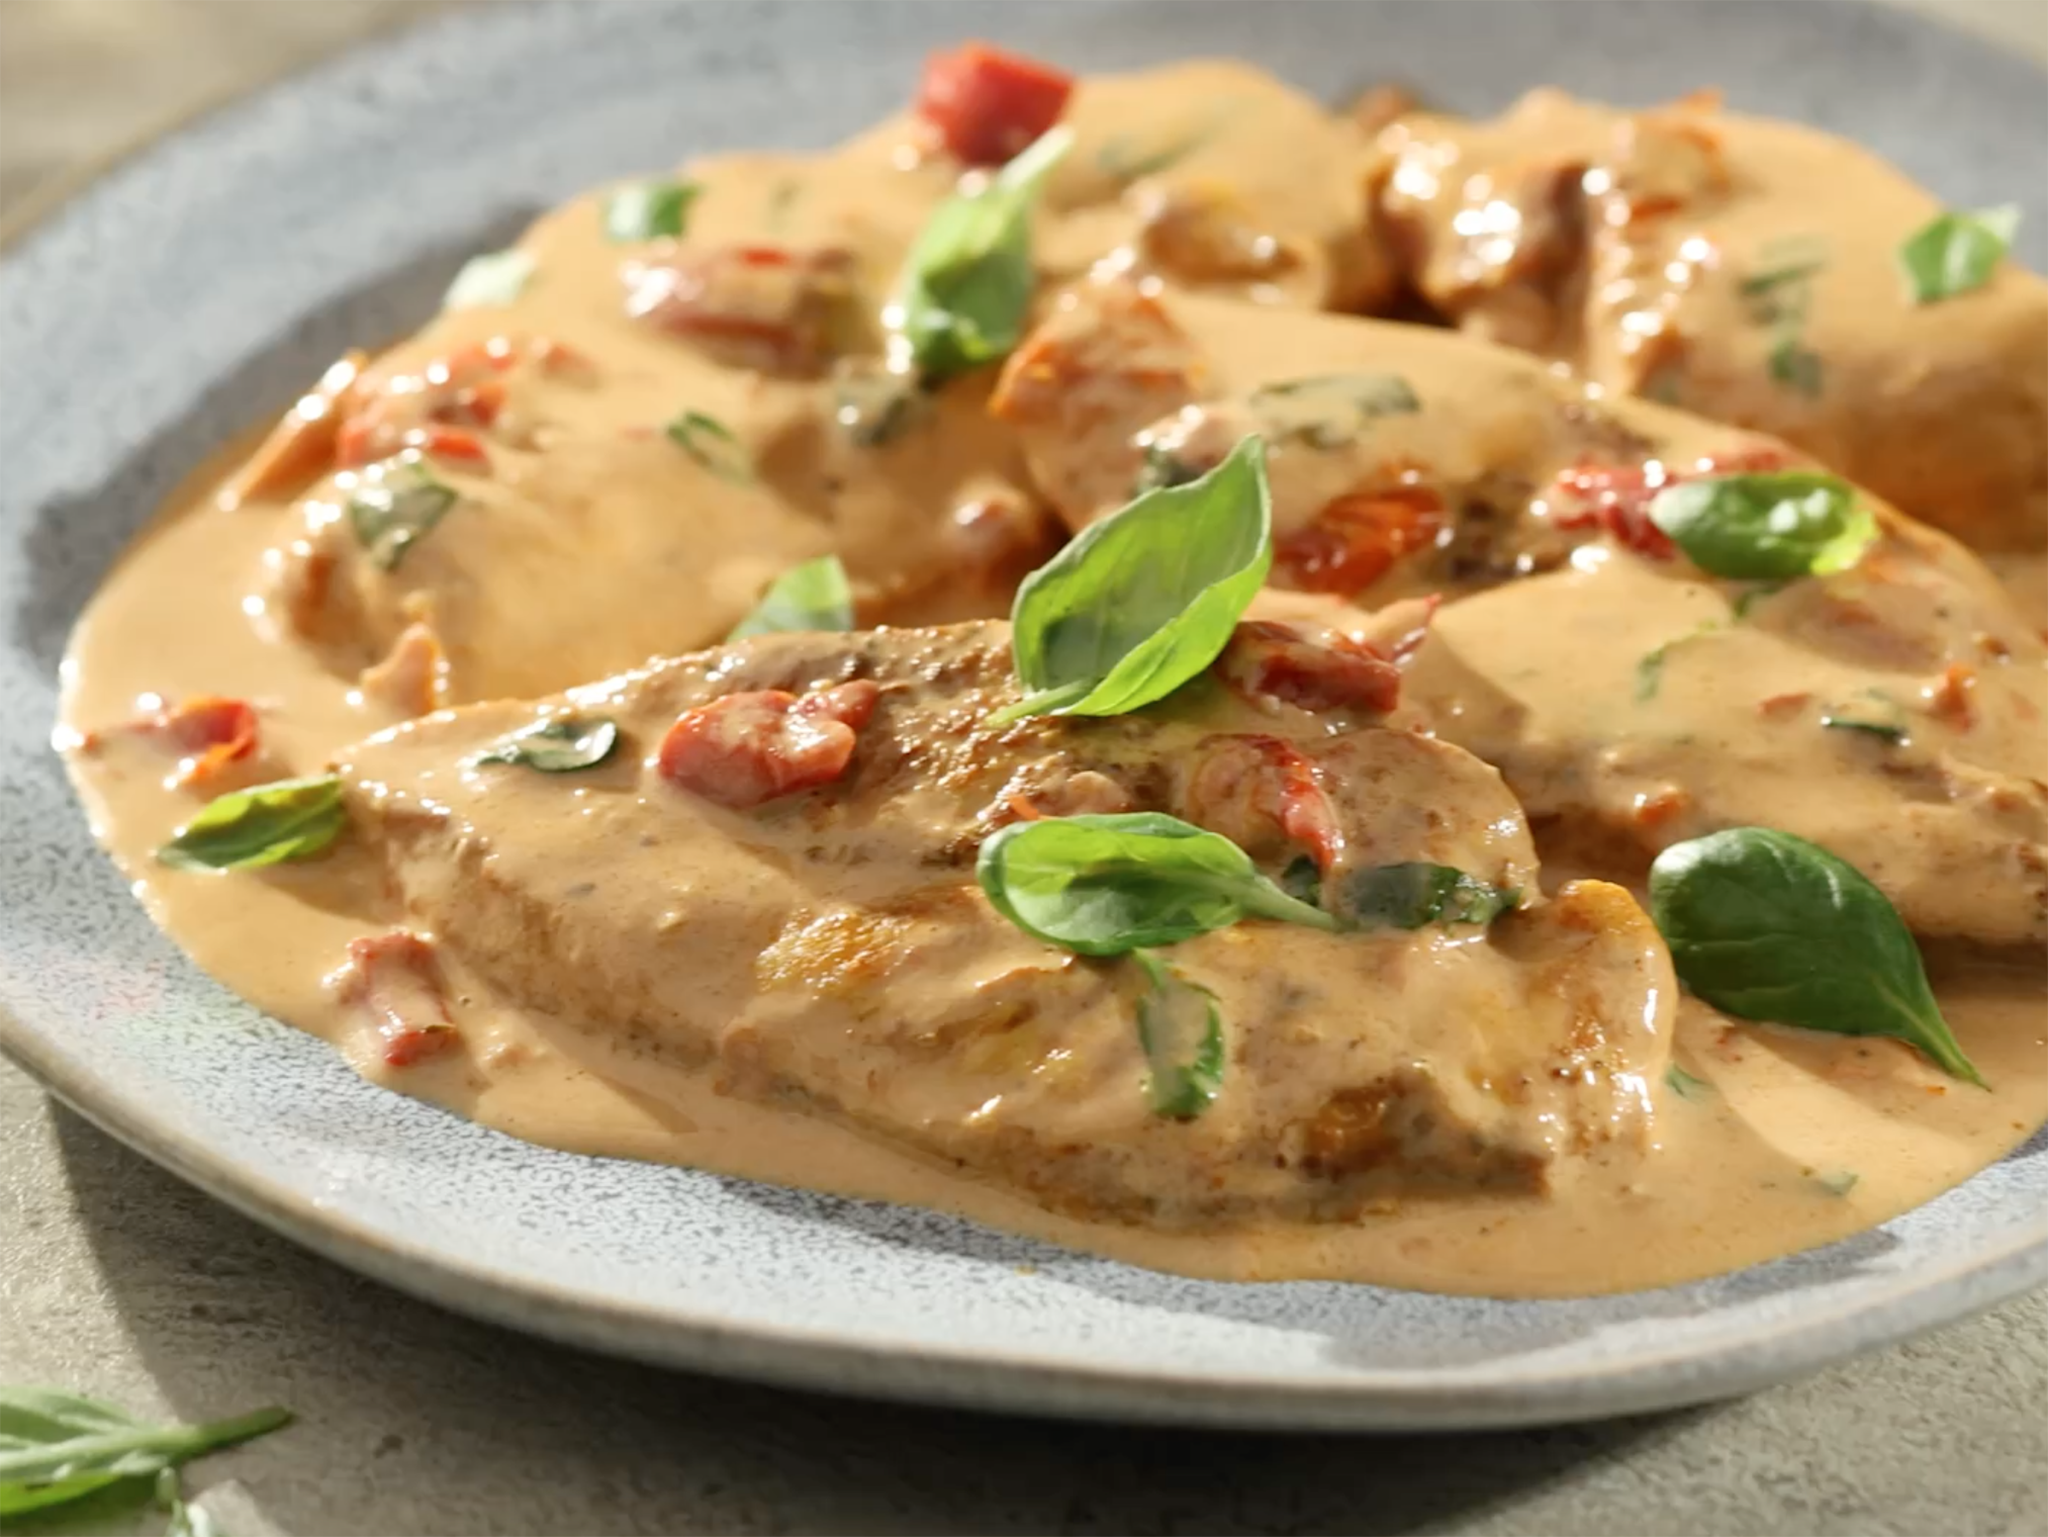 Juicy chicken and a rich, creamy sauce is an excellent combo